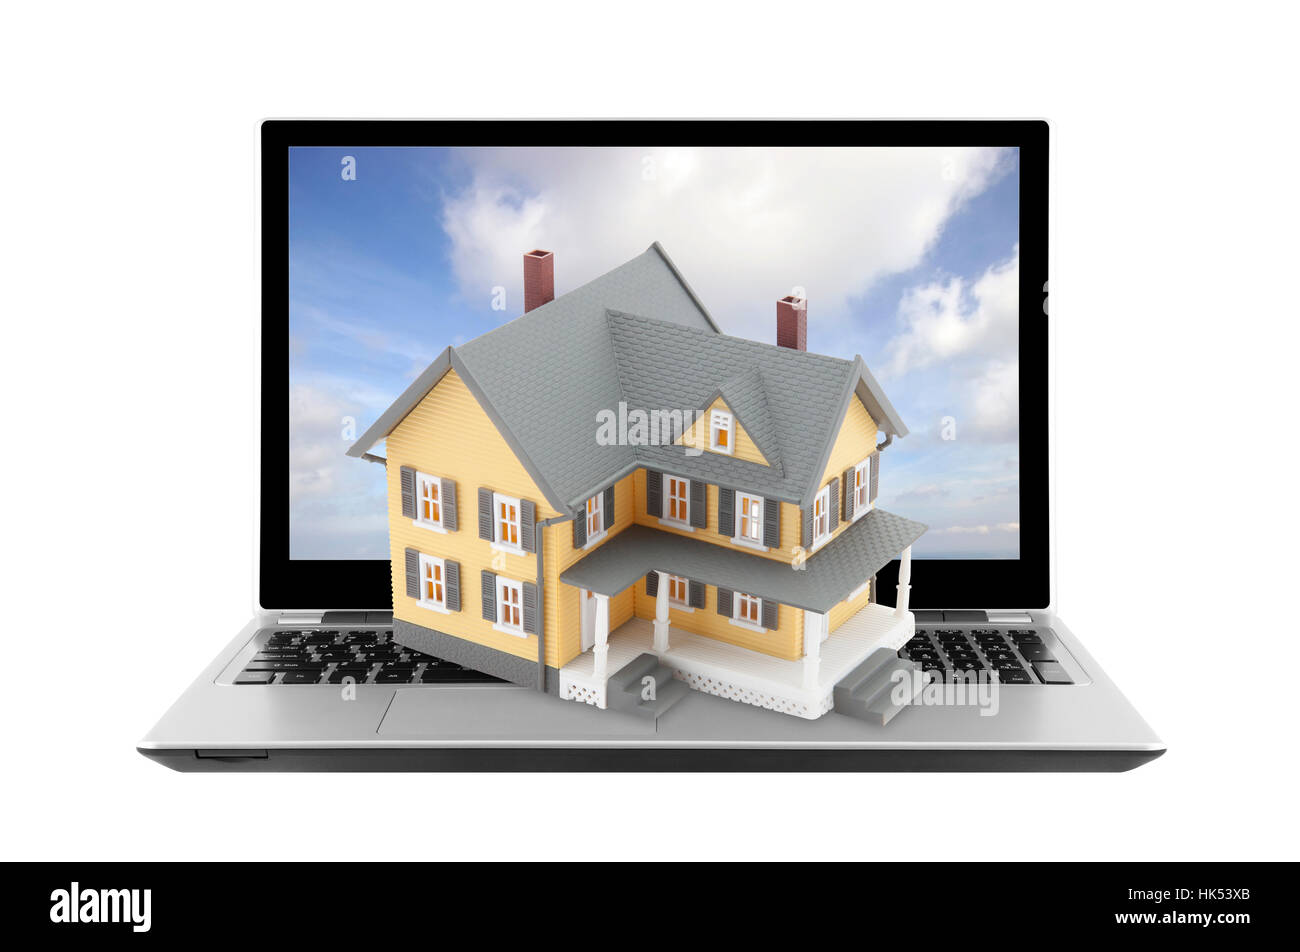 Blue House Building Laptop Notebook Computers Computer Keyboard Pc Stock Photo Alamy